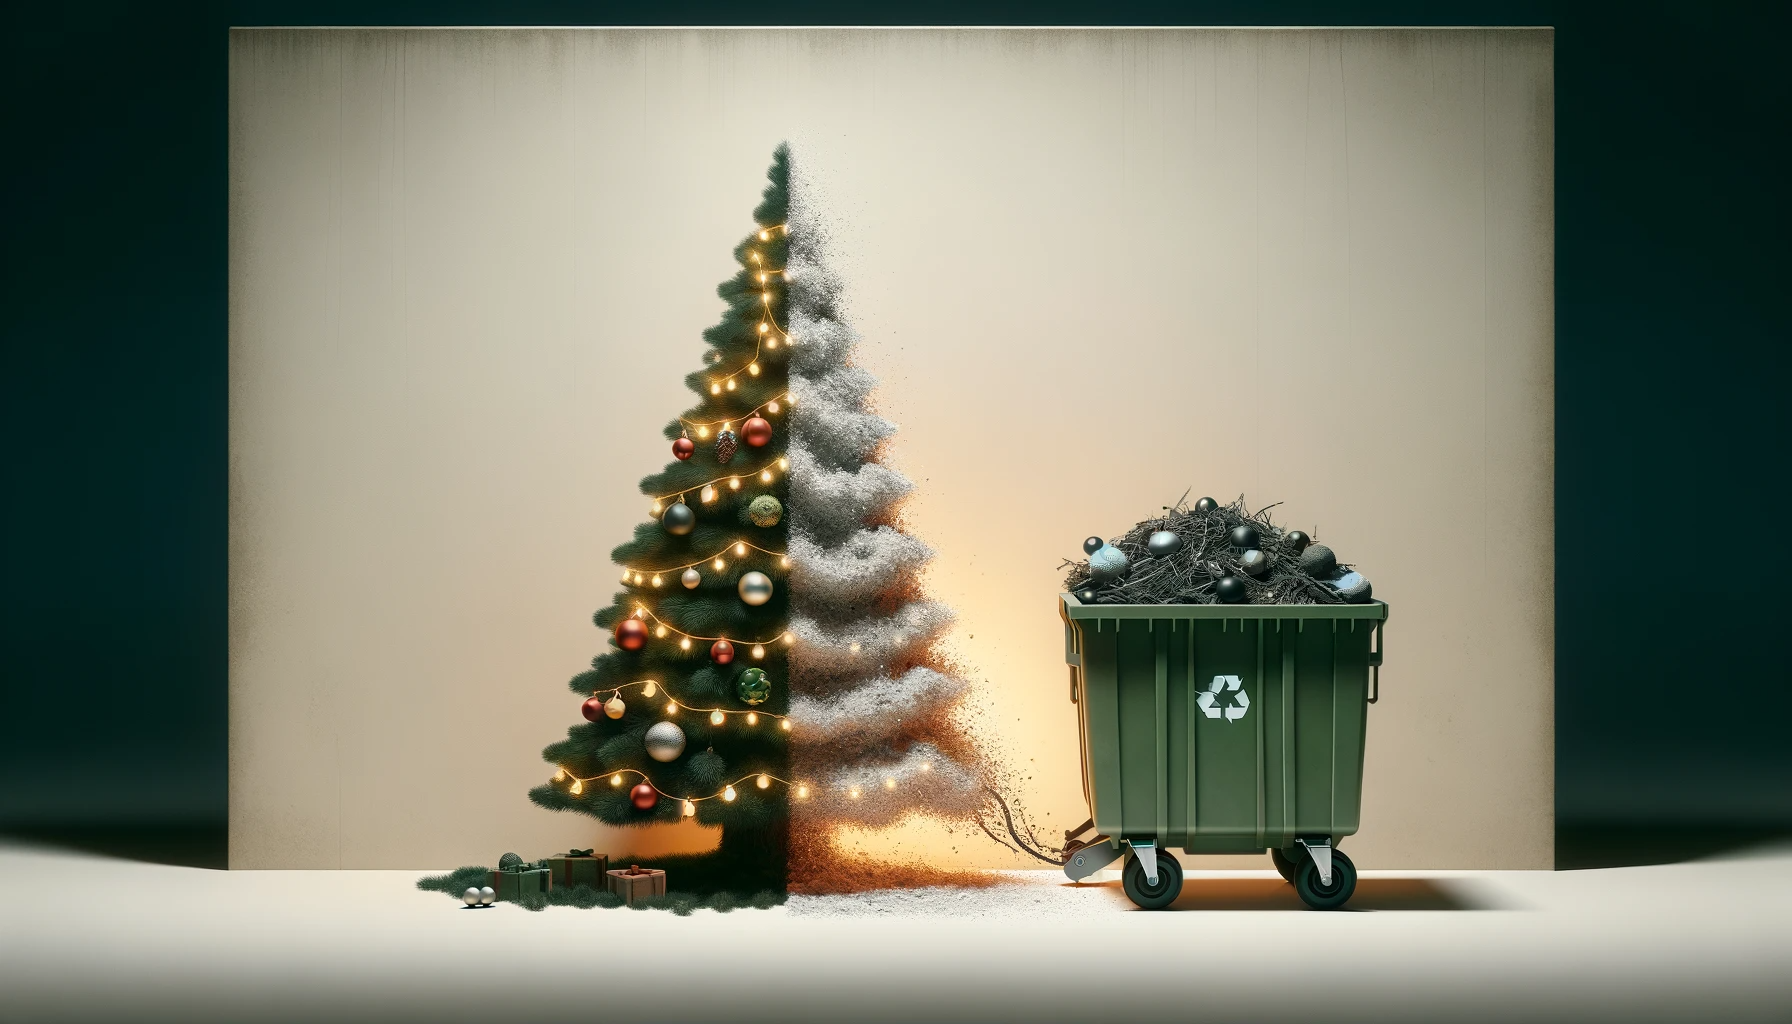 “Deck the Halls, Not the Landfills!” – Your Eco-Friendly Holiday Guide